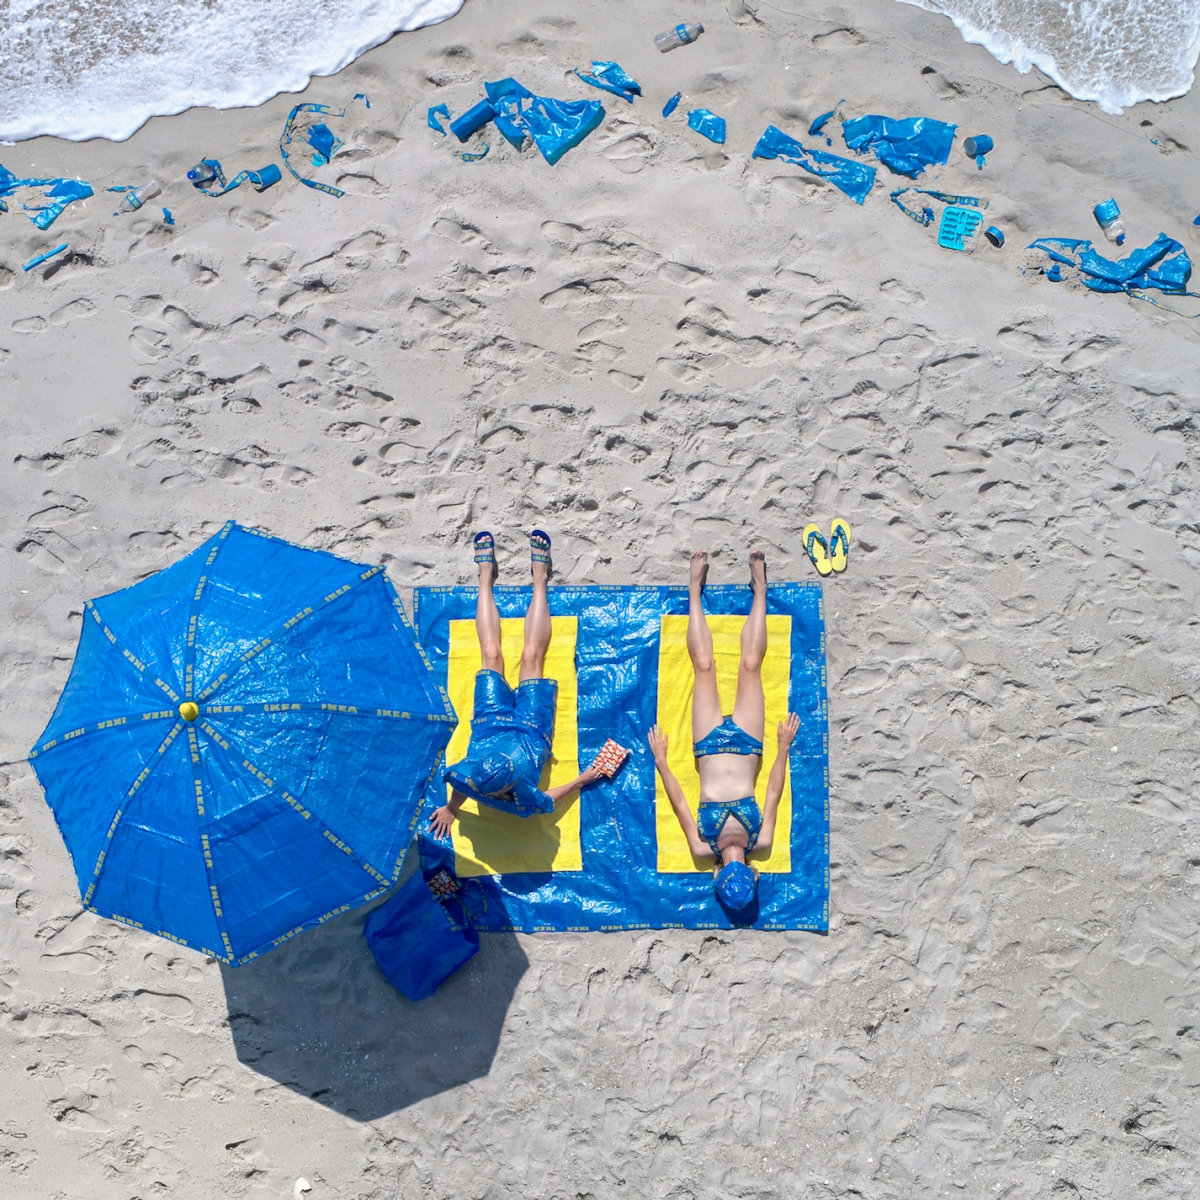 Photograph of a couple sunbathing using towels, beach umbrella, bathing suits and other items made of IKEA plastic bags.